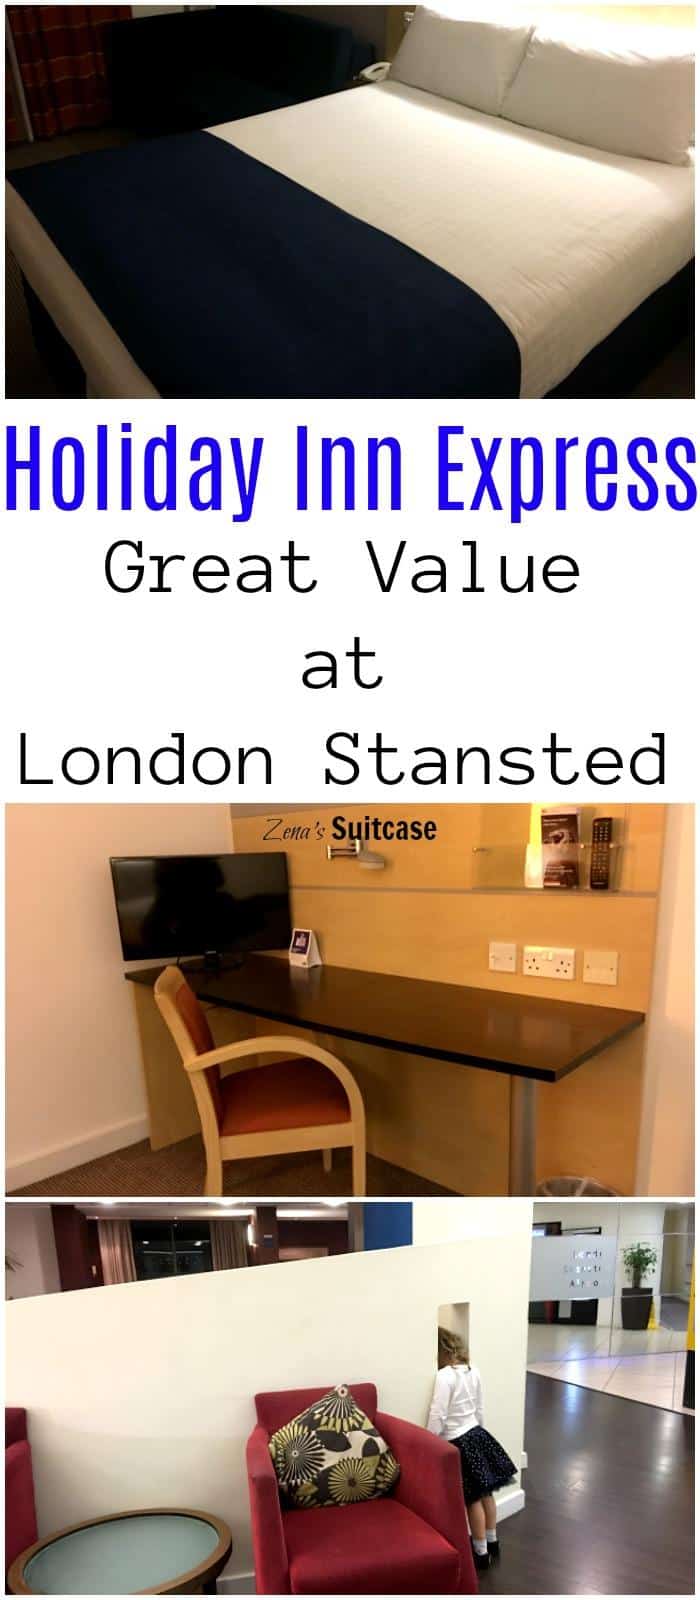 London Stansted Hotel - Holiday Inn Express review: We stayed with Holiday Inn Express at London Stansted Airport before and after taking a trip from the airport. We stayed at the hotel with children and parked the car during our stay and while we were away. This review covers our experience and some helpful information about staying at the hotel 